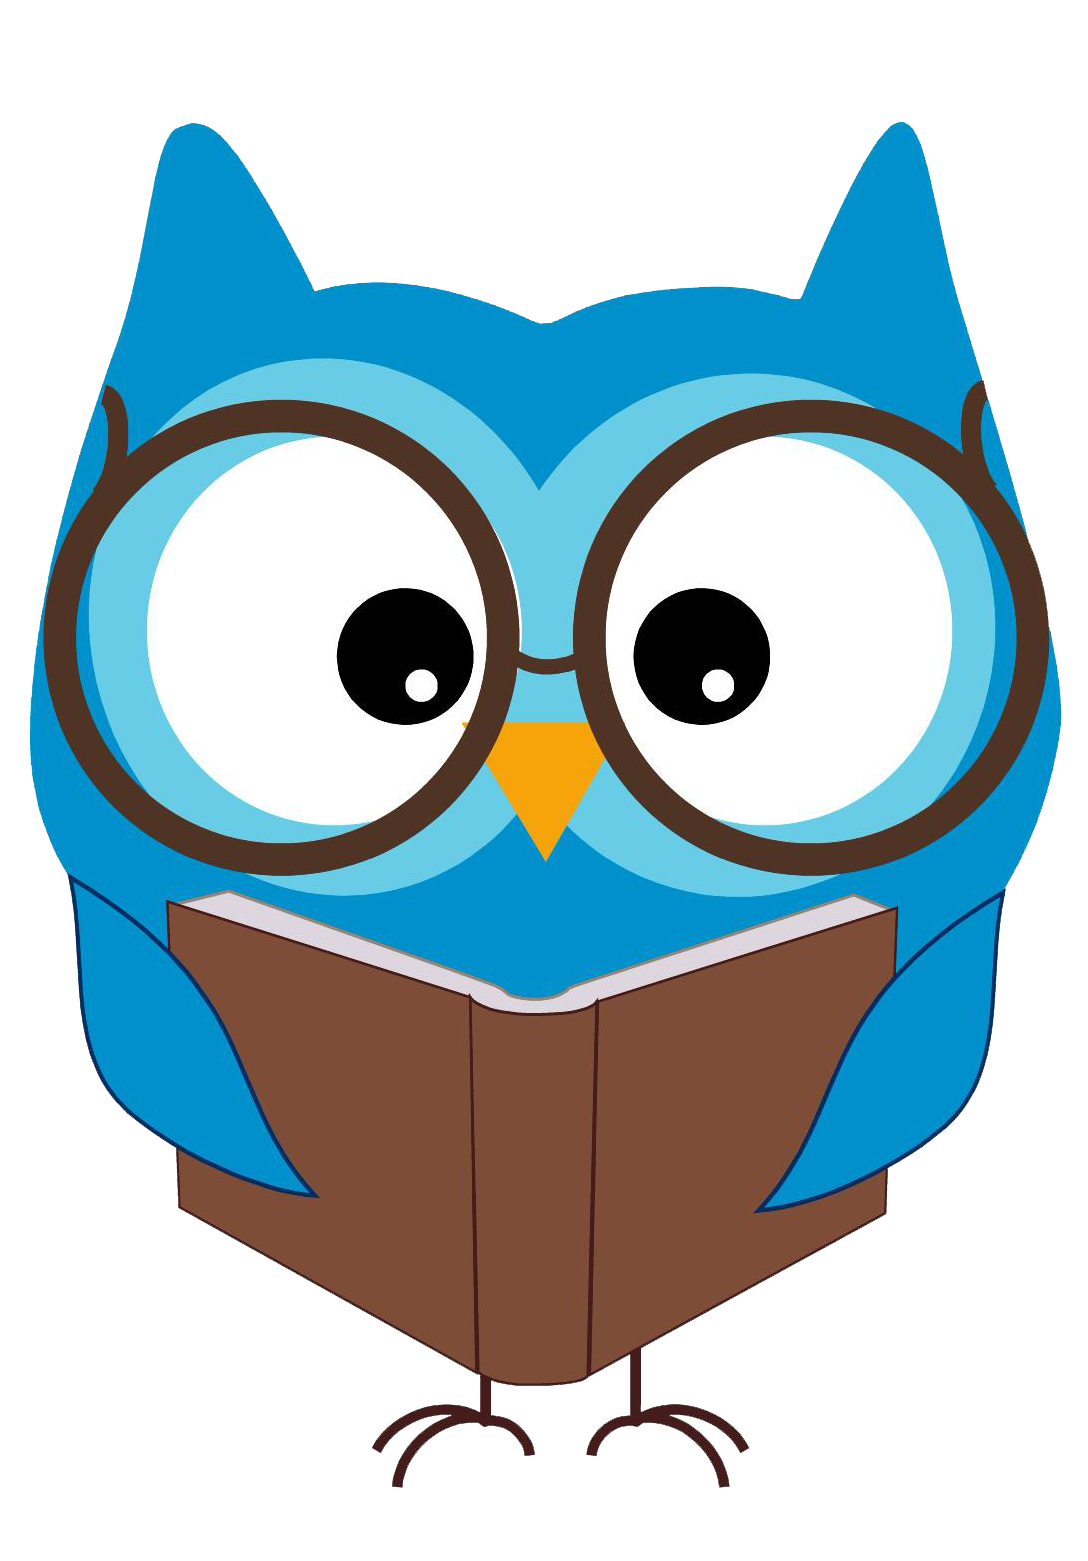  Reading Clip Art of Reading owl clip art image for your personalprojects, presentations or web designs., Animals Reading PNG HD - Free PNG